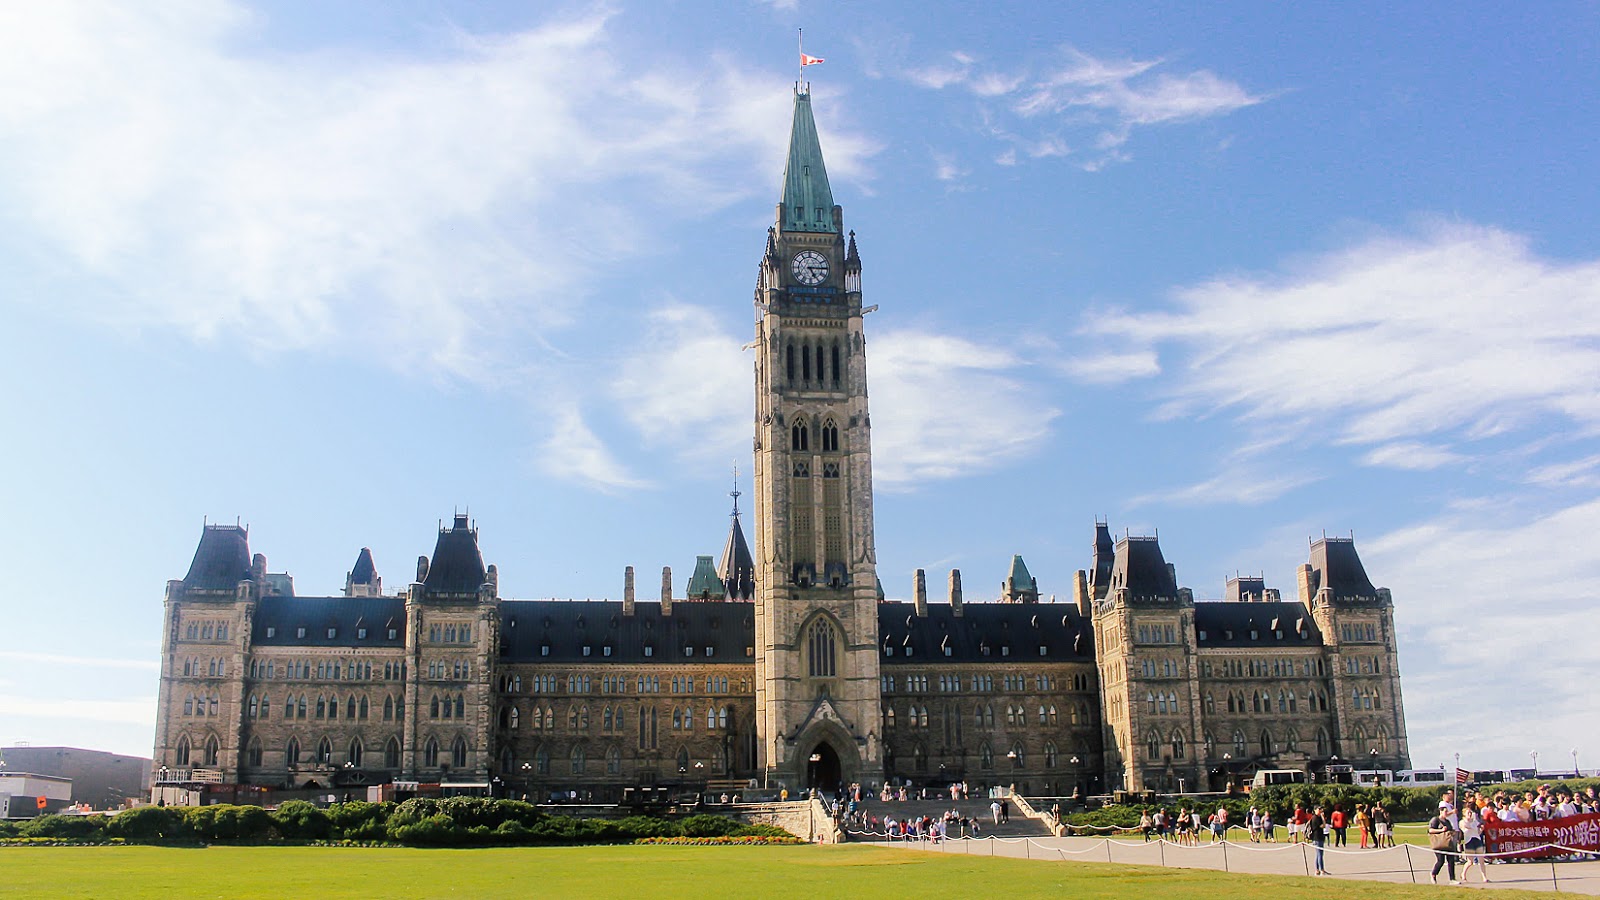 Canada's Parliament Hill: Things To Do in Ottawa, Ontario, Canada